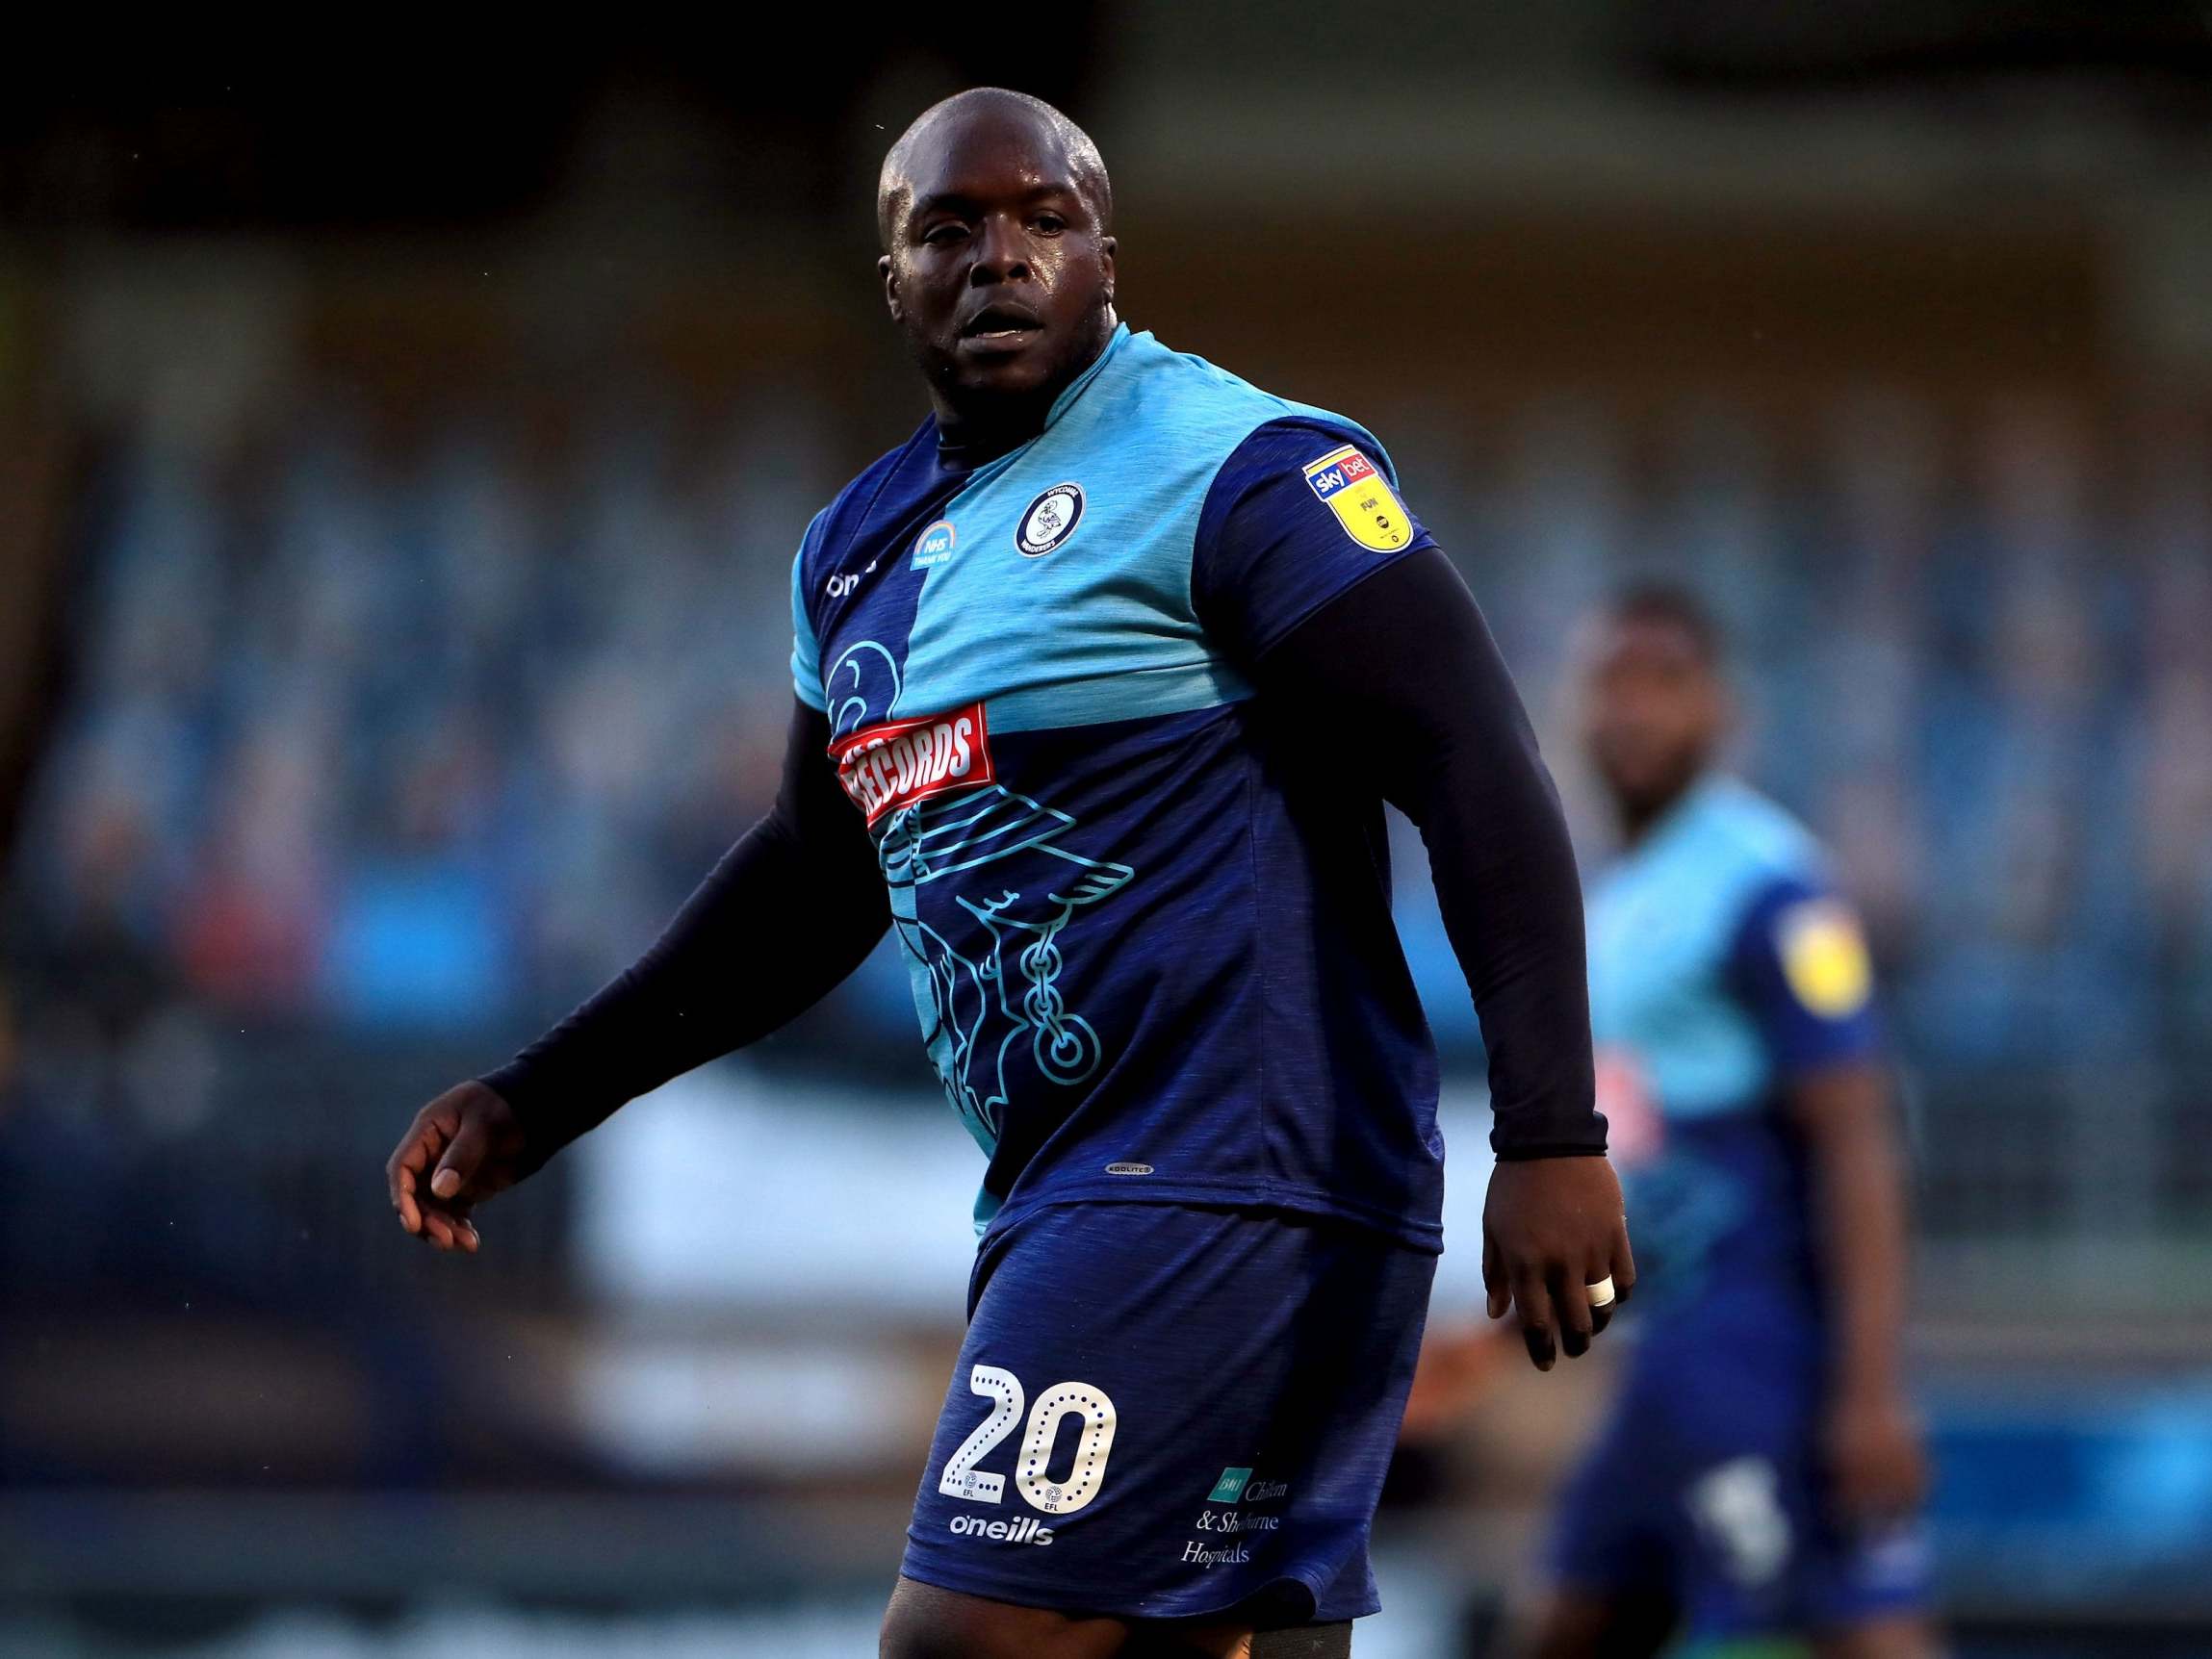 Adebayo Akinfenwa claimed he was called a 'fat water buffalo' by a member of Fleetwood Town